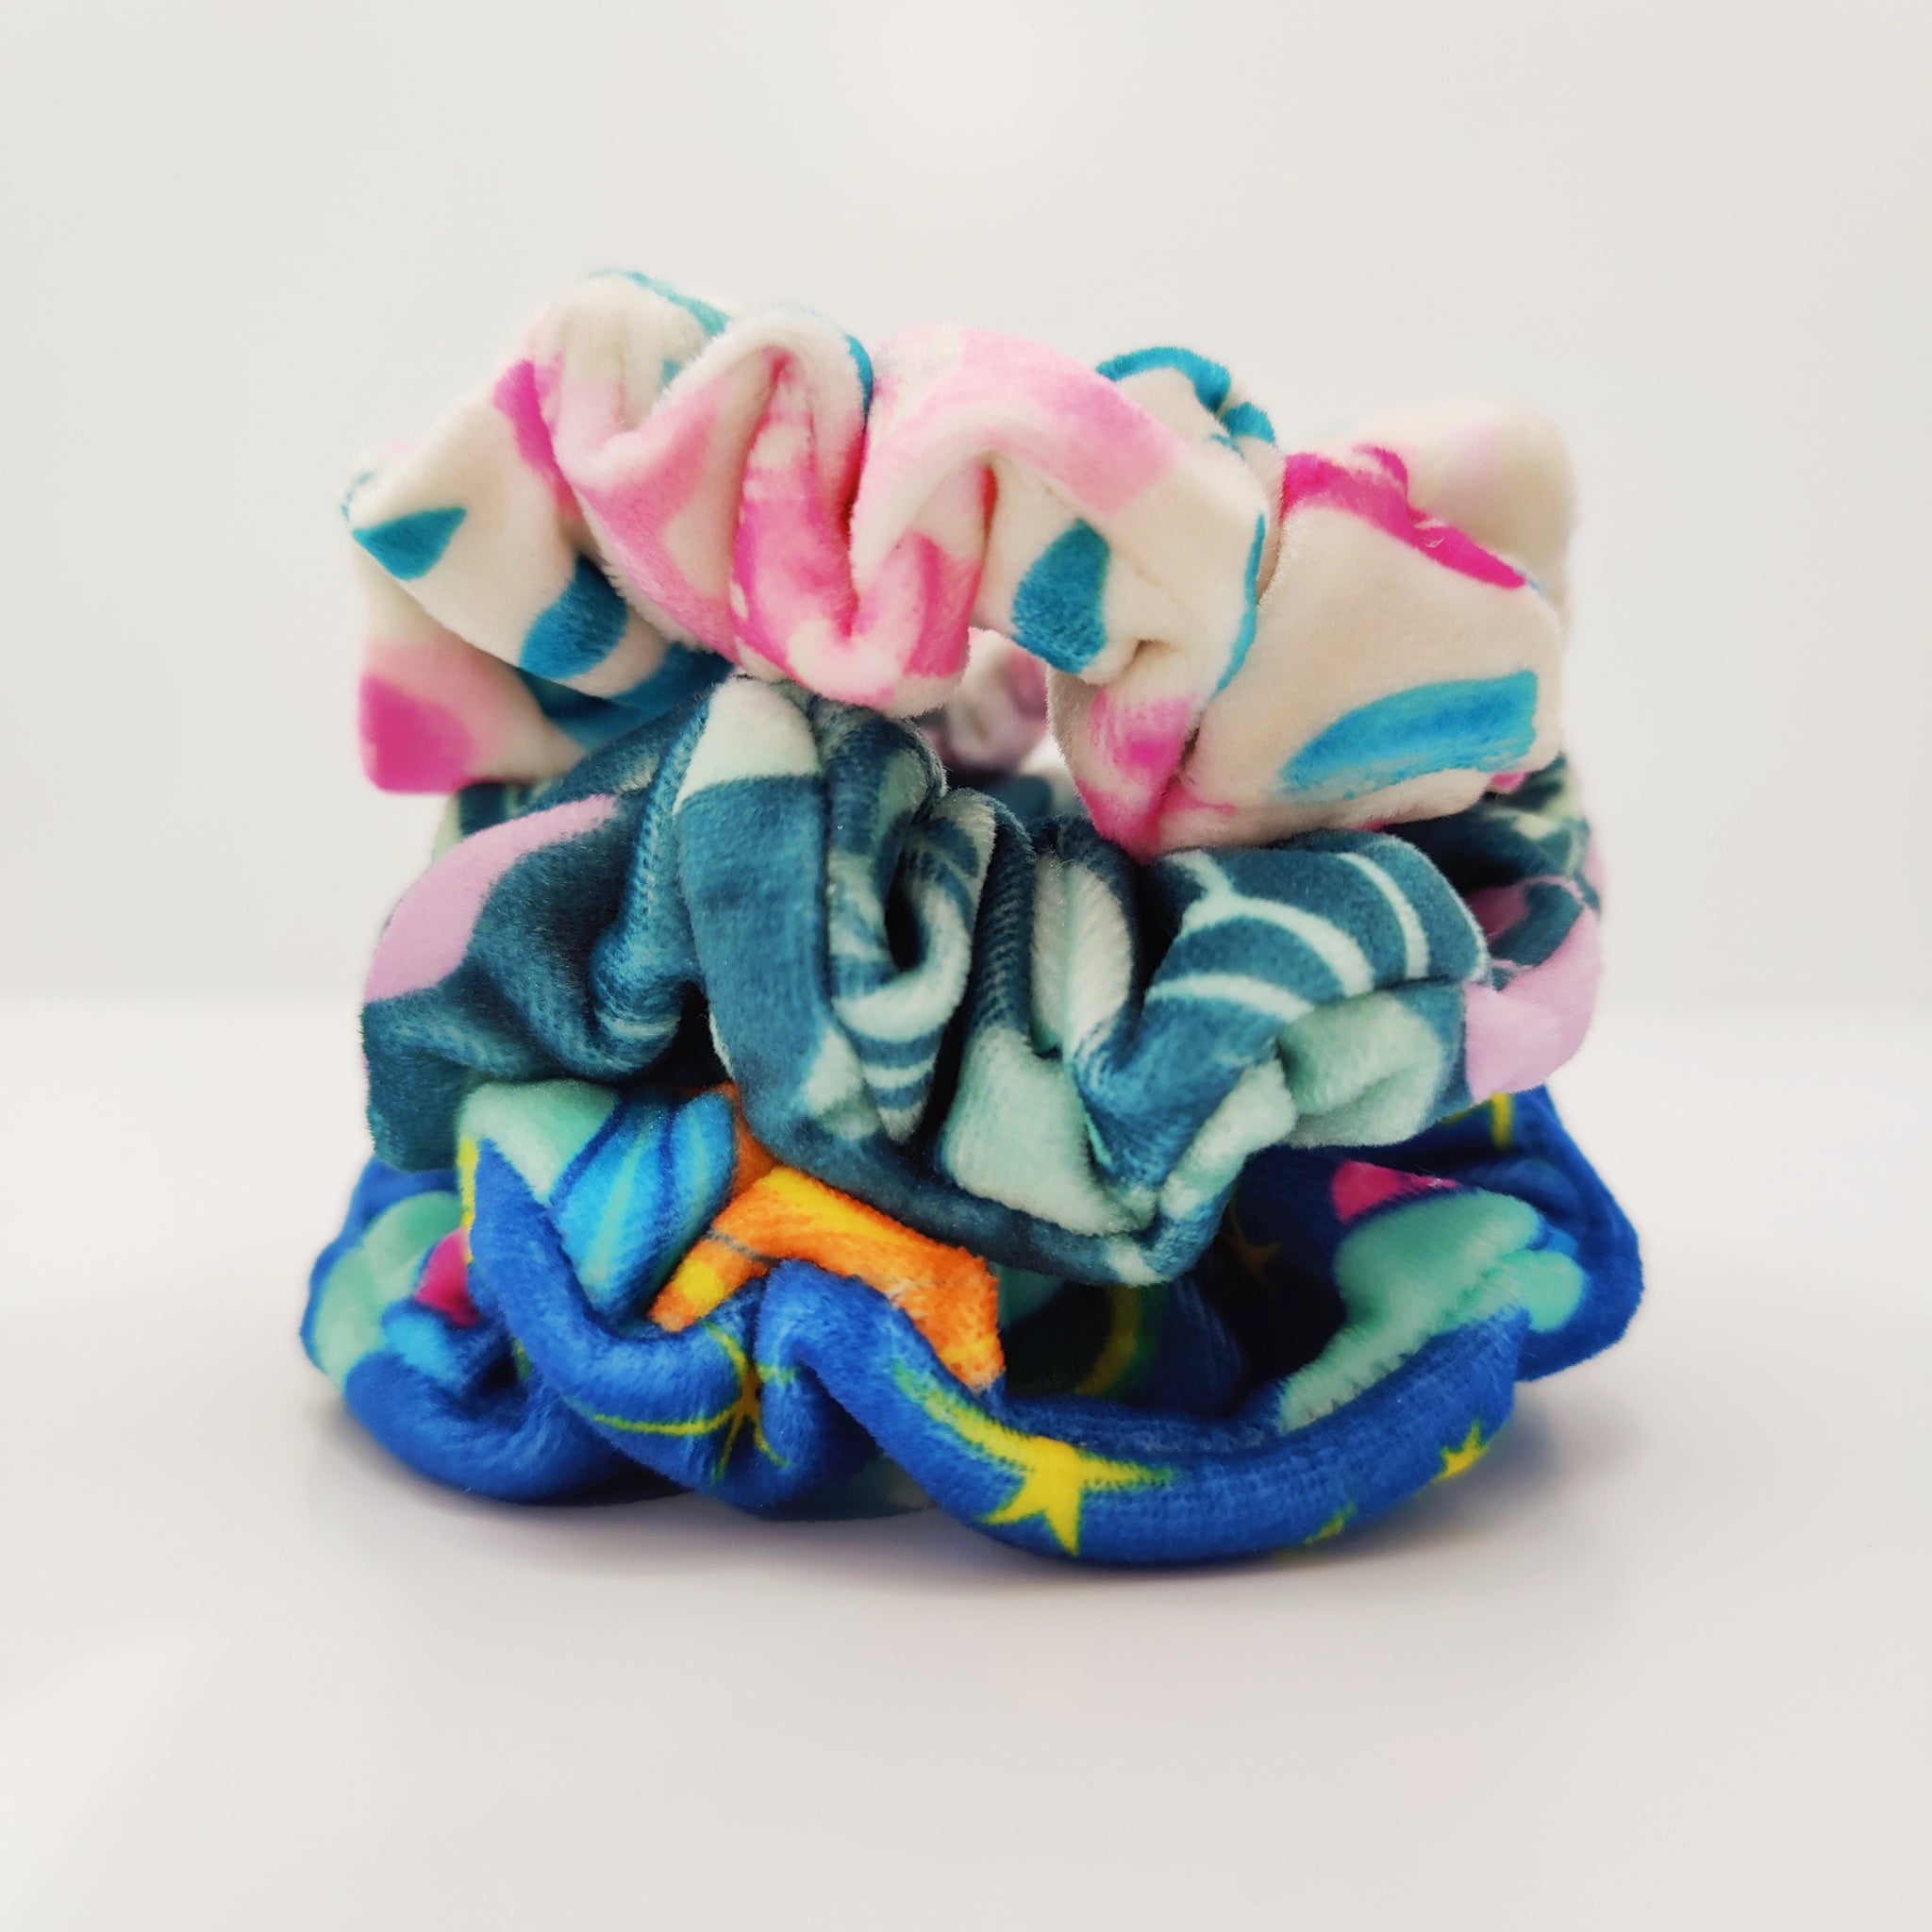 Scrunchies Subscription - 3 months - December 2020, February 2021, April 2021